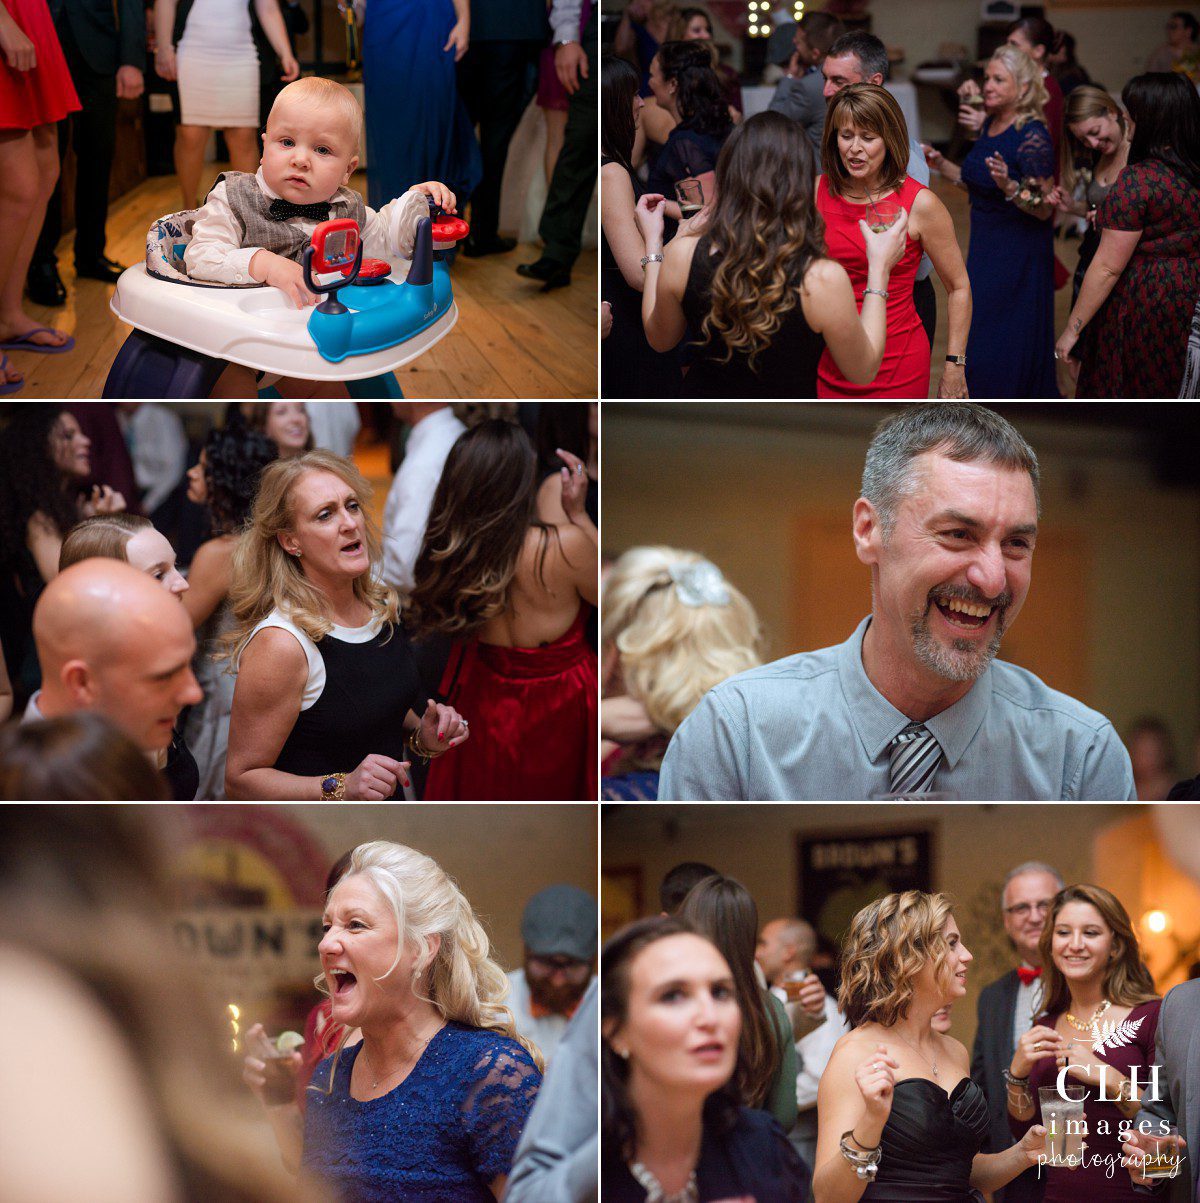 clh-images-photography-revolution-hall-wedding-revolution-hall-wedding-photography-troy-ny-wedding-brewery-wedding-erica-and-jeff-wedding-capital-district-wedding-photographer-174